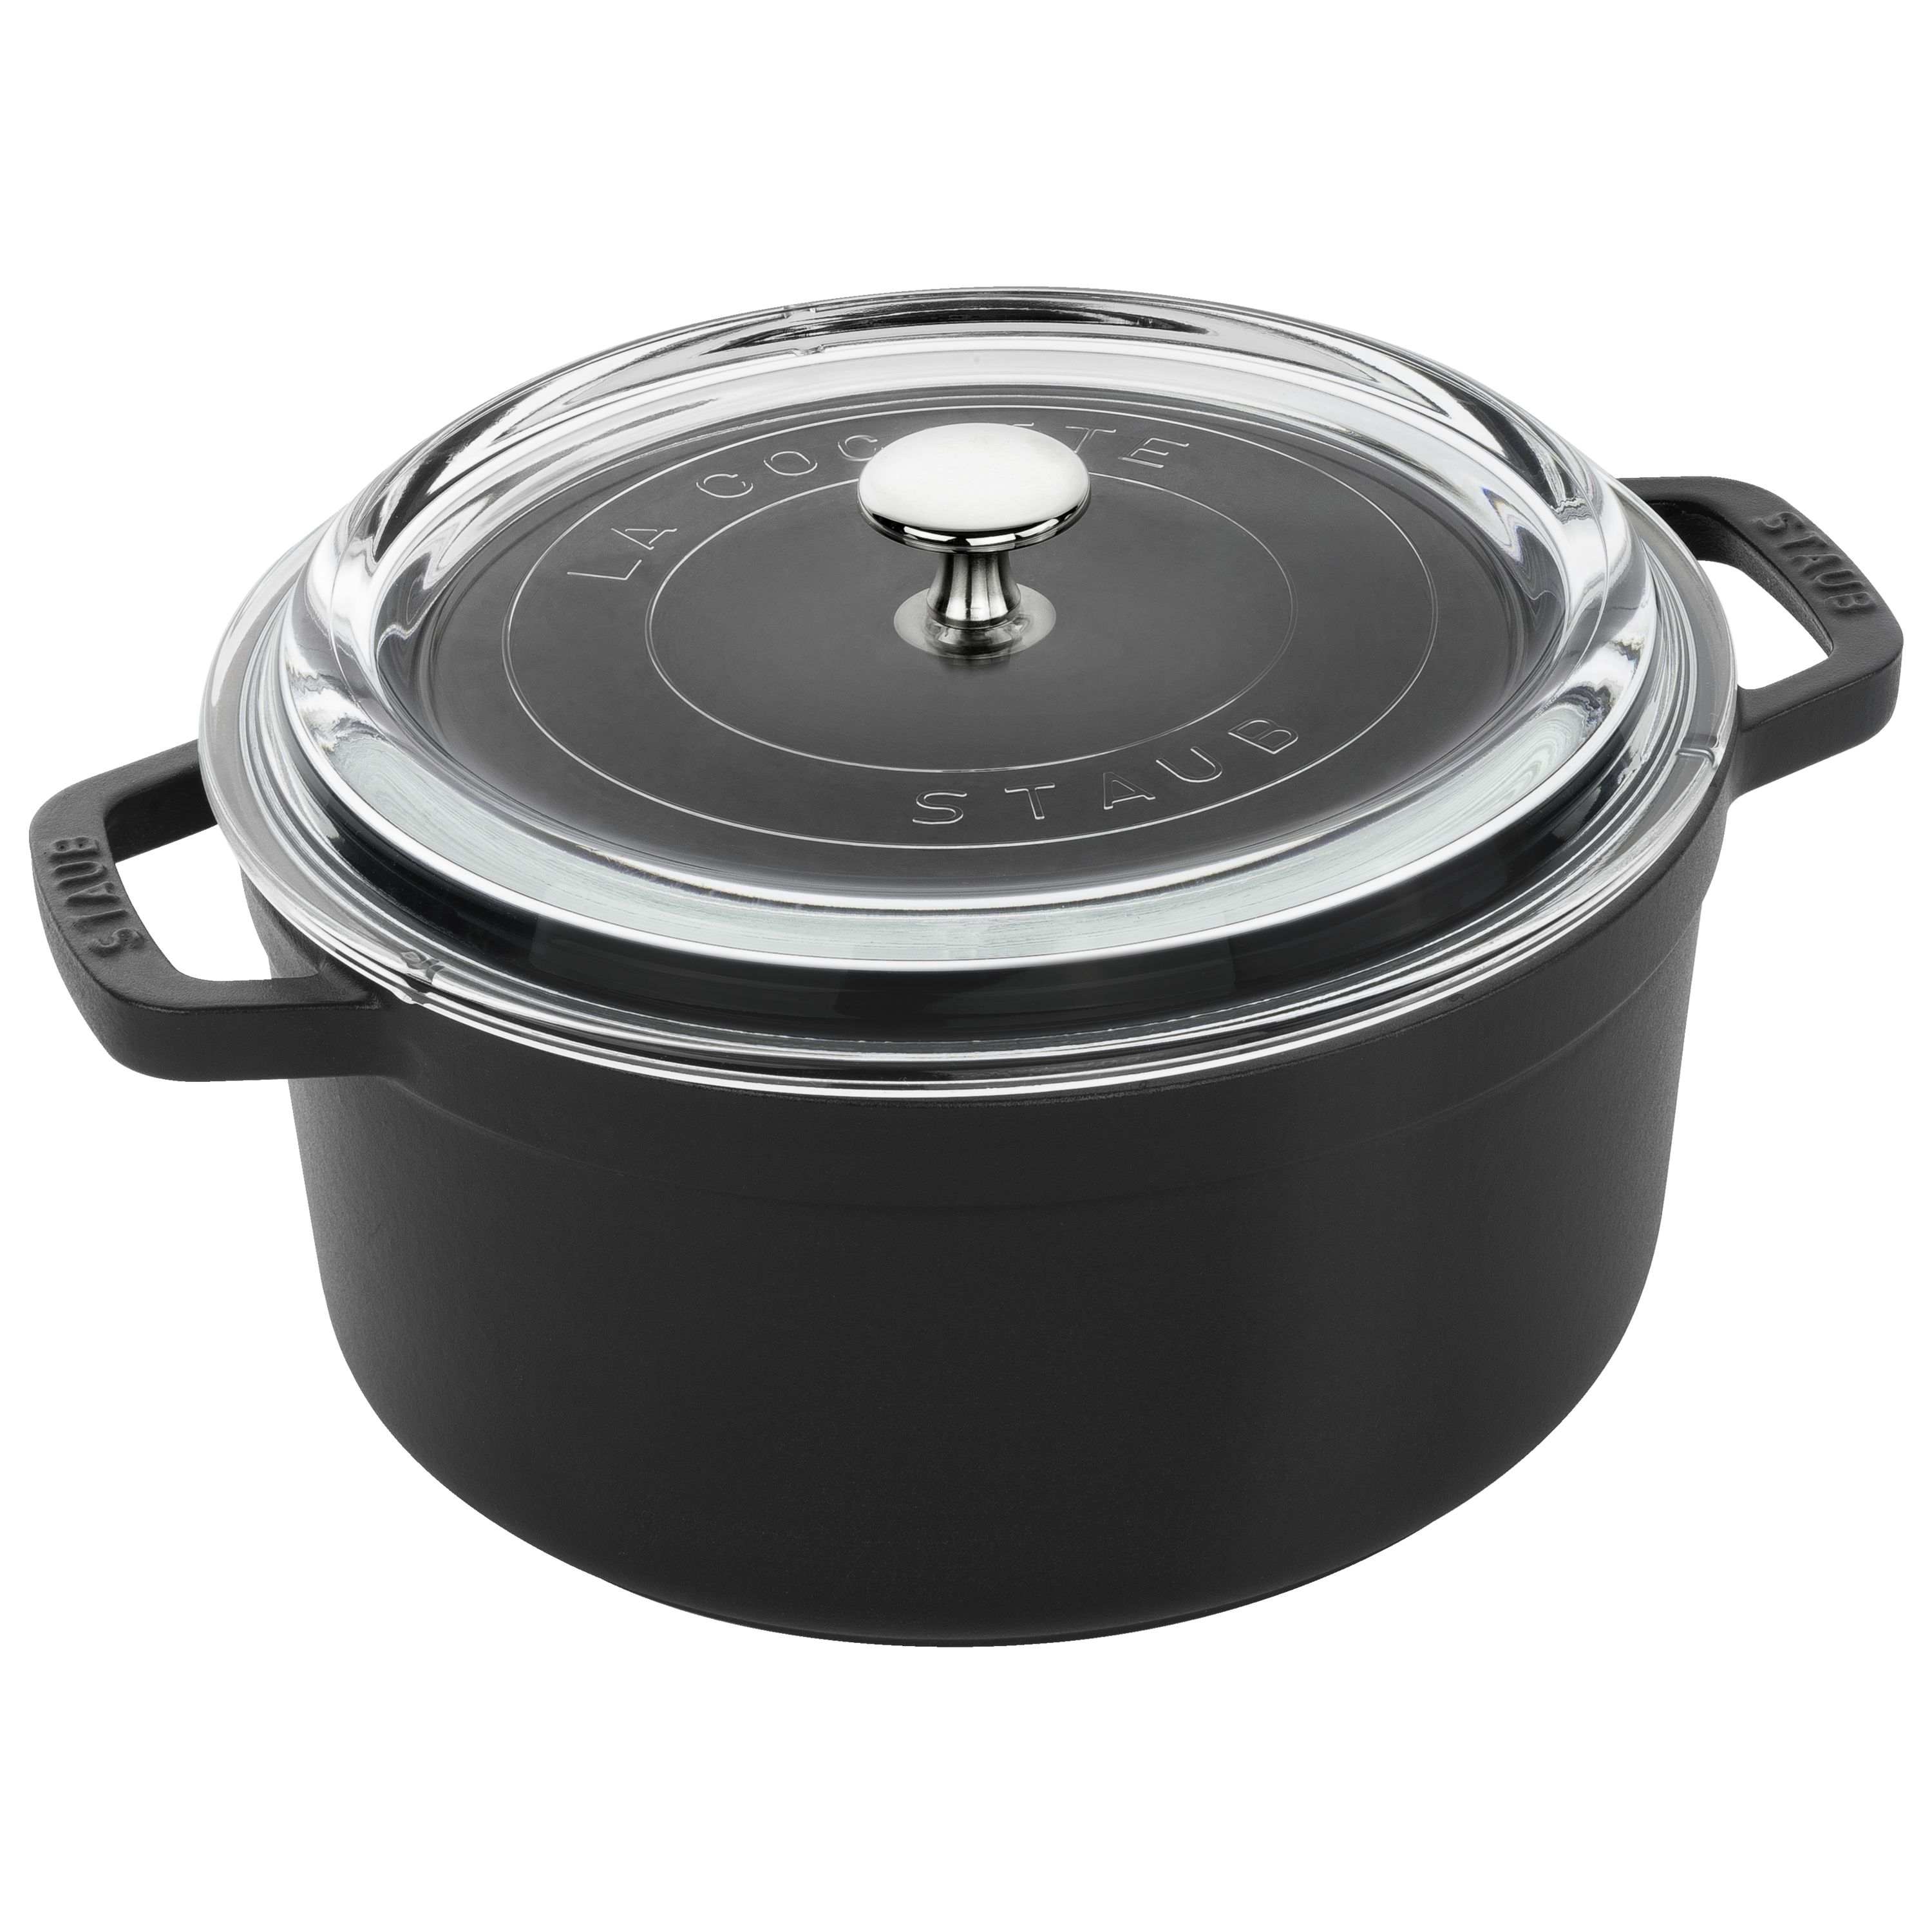 Buy Staub Cast Iron Cocotte with glass lid | ZWILLING.COM